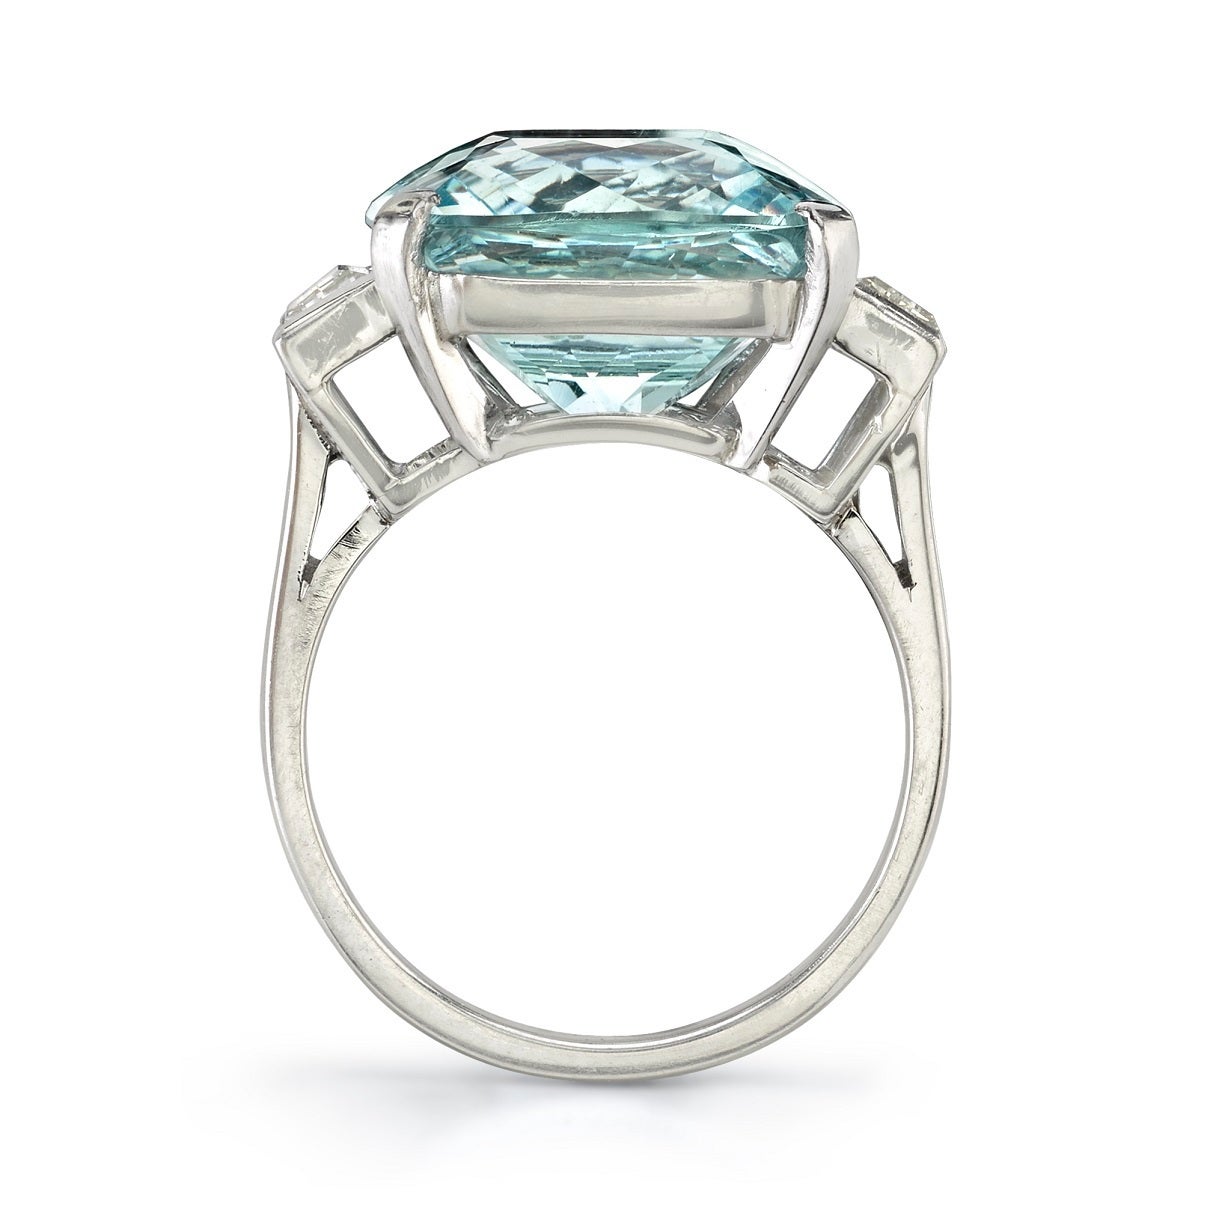 10.74ct Cushion cut Aquamarine with 1.00ctw Baguette accent diamonds set in a vintage platinum mounting. Circa 1940. An incredible Art Deco ring.